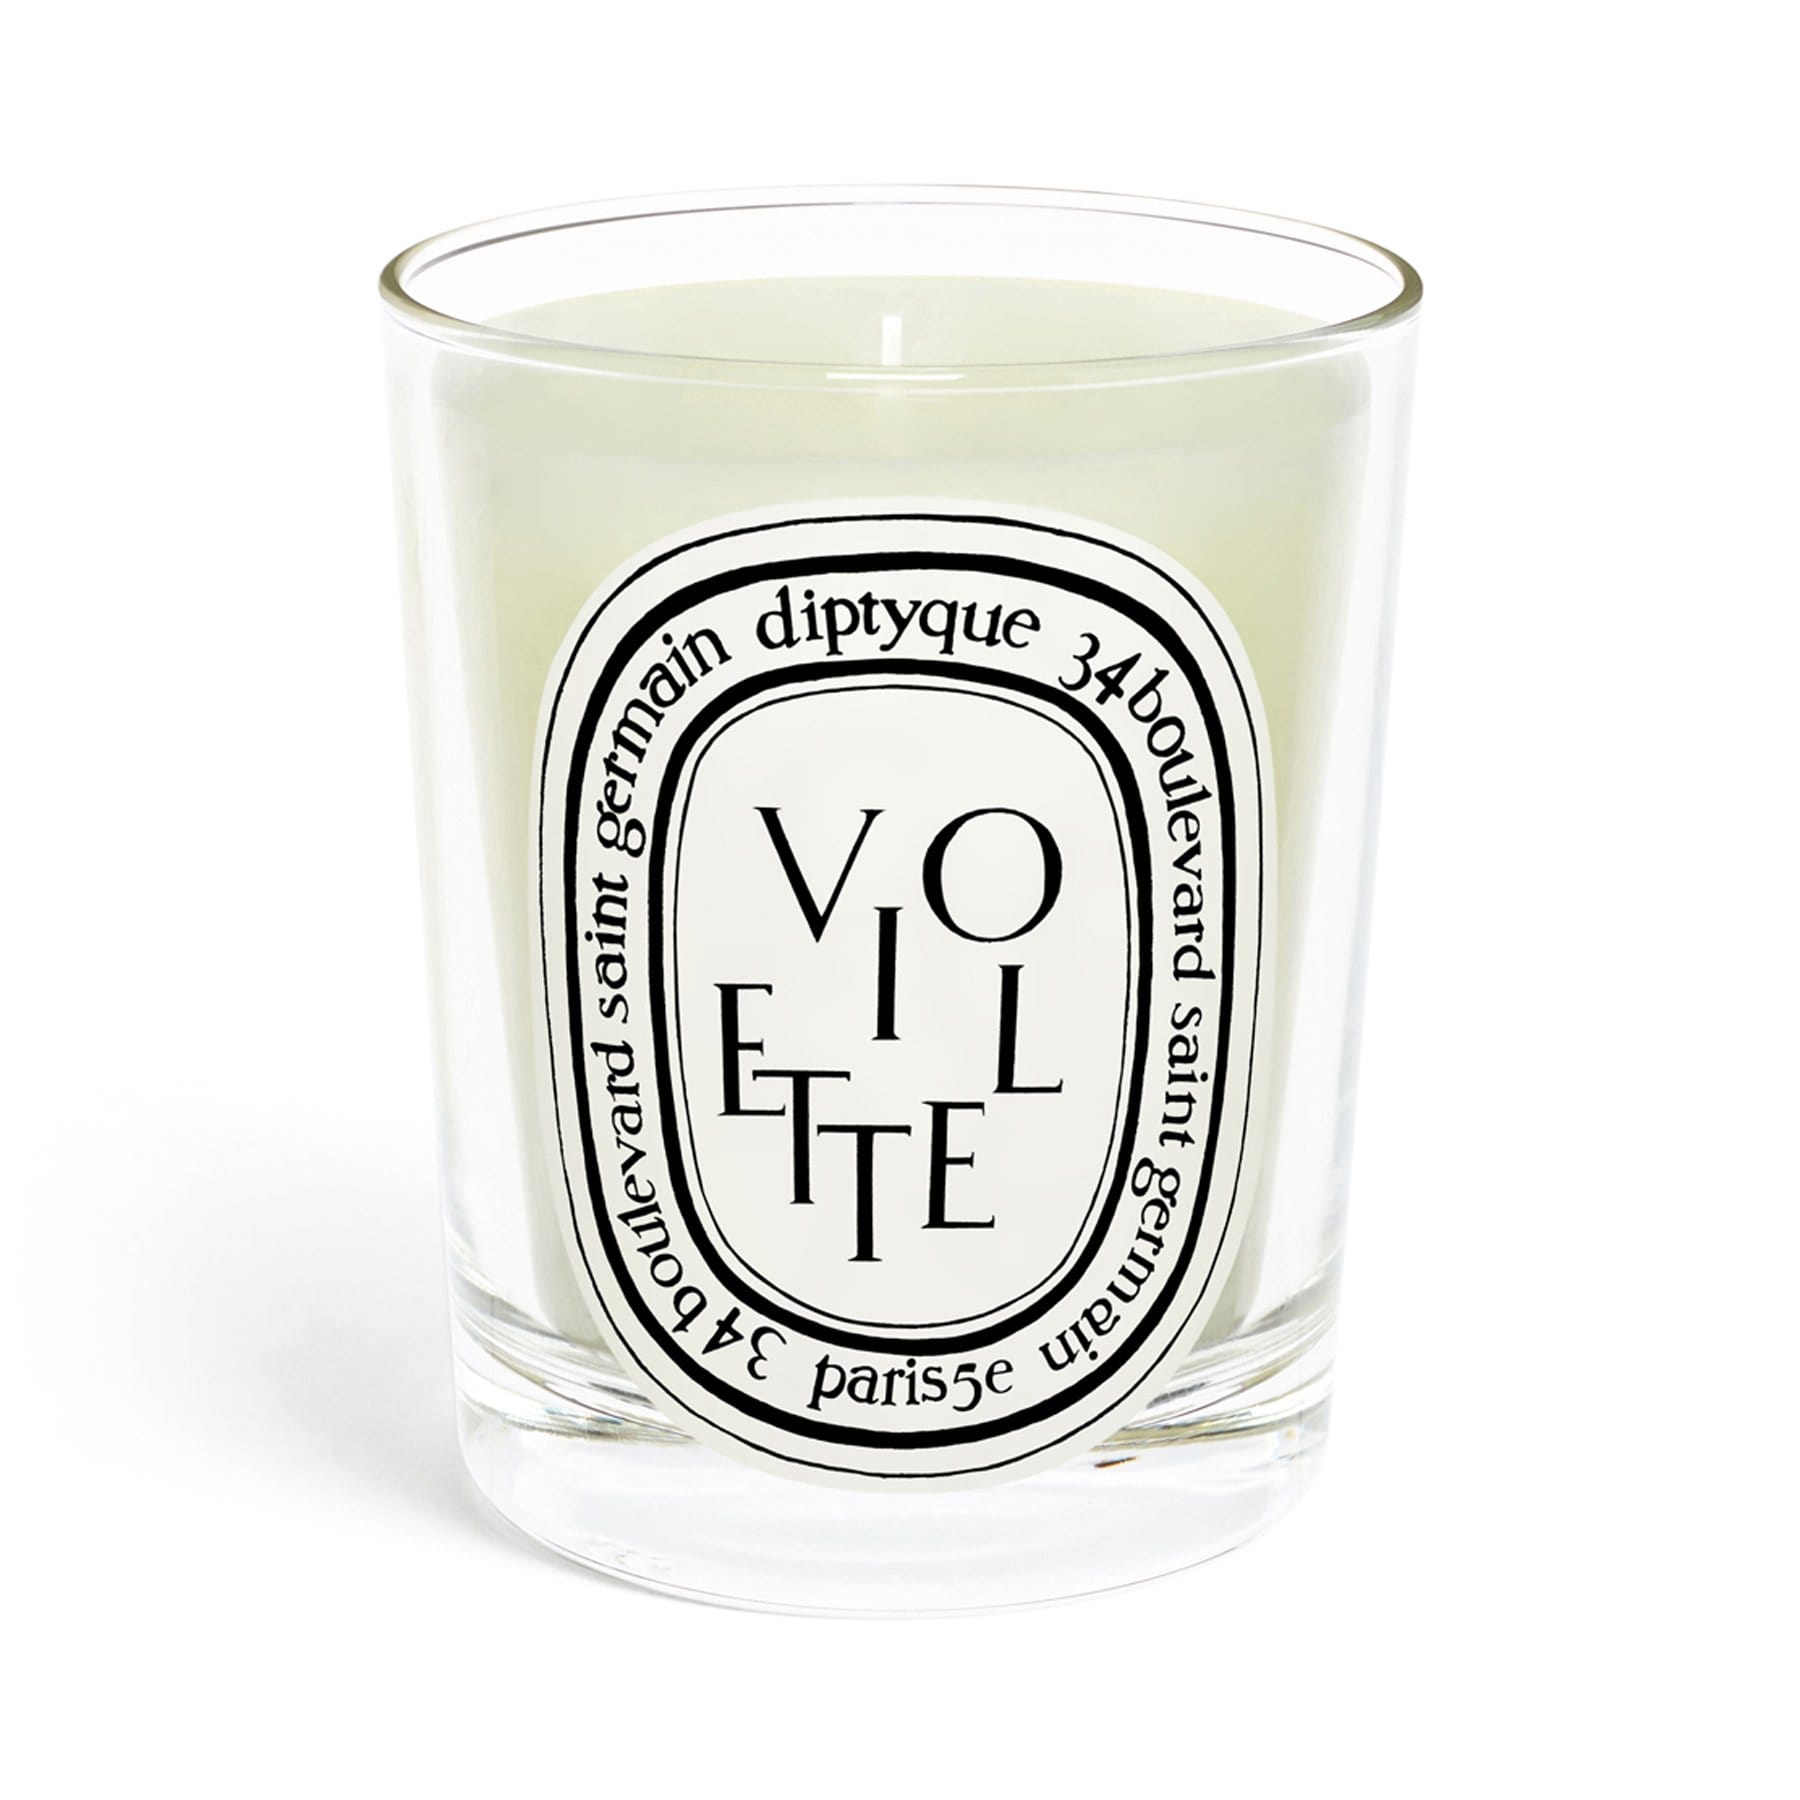 Violette Diptyque Scented Candle